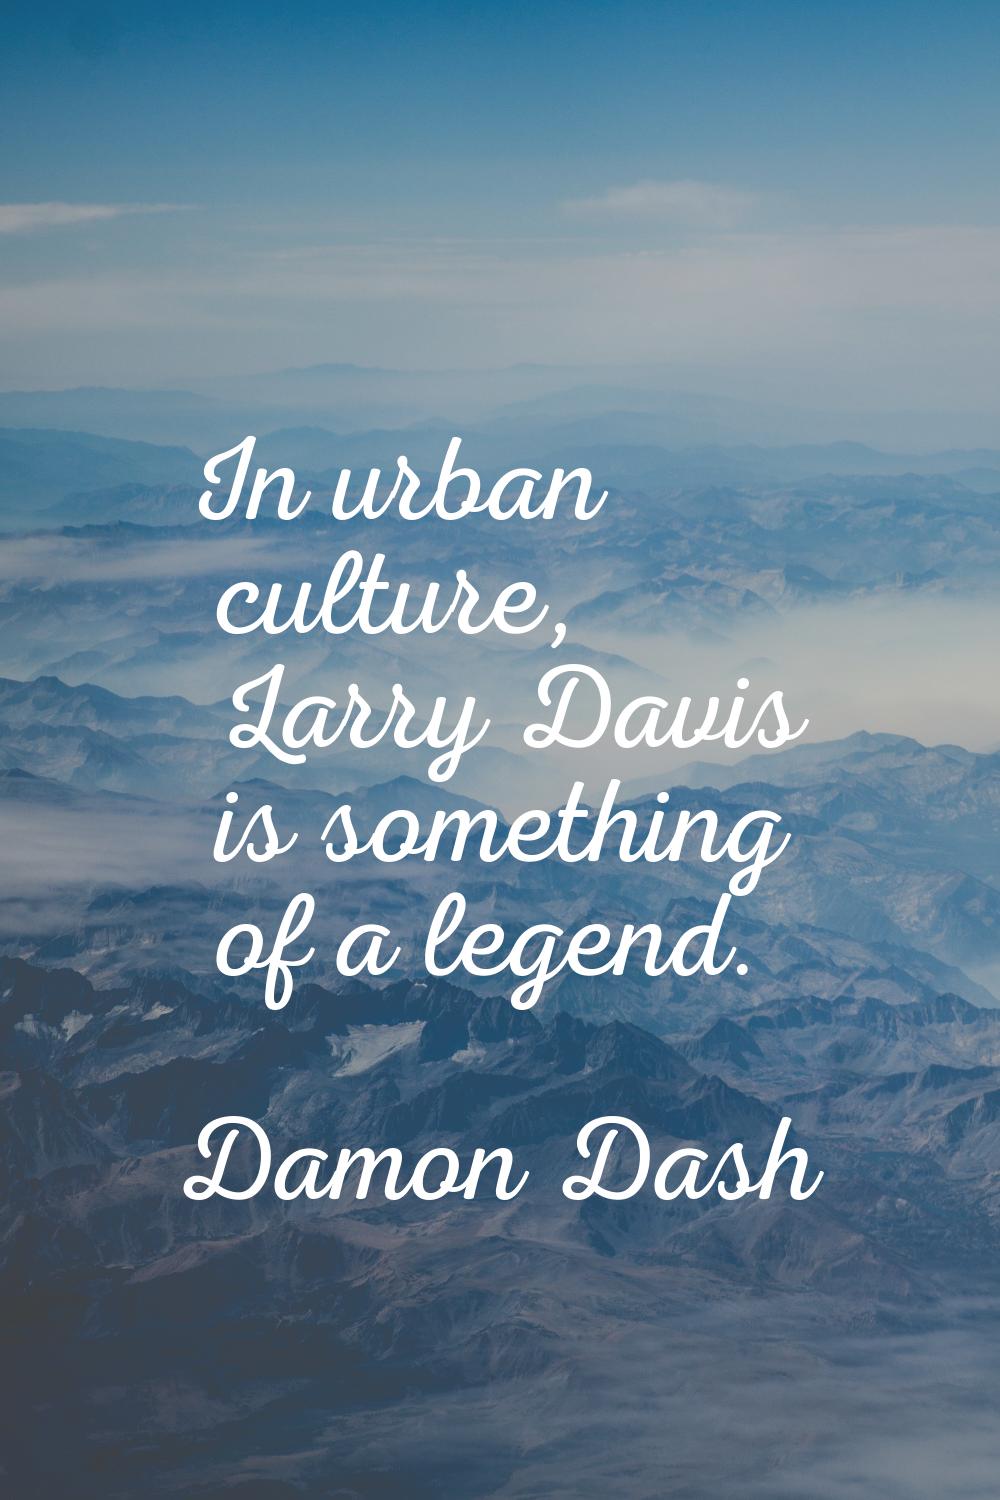 In urban culture, Larry Davis is something of a legend.